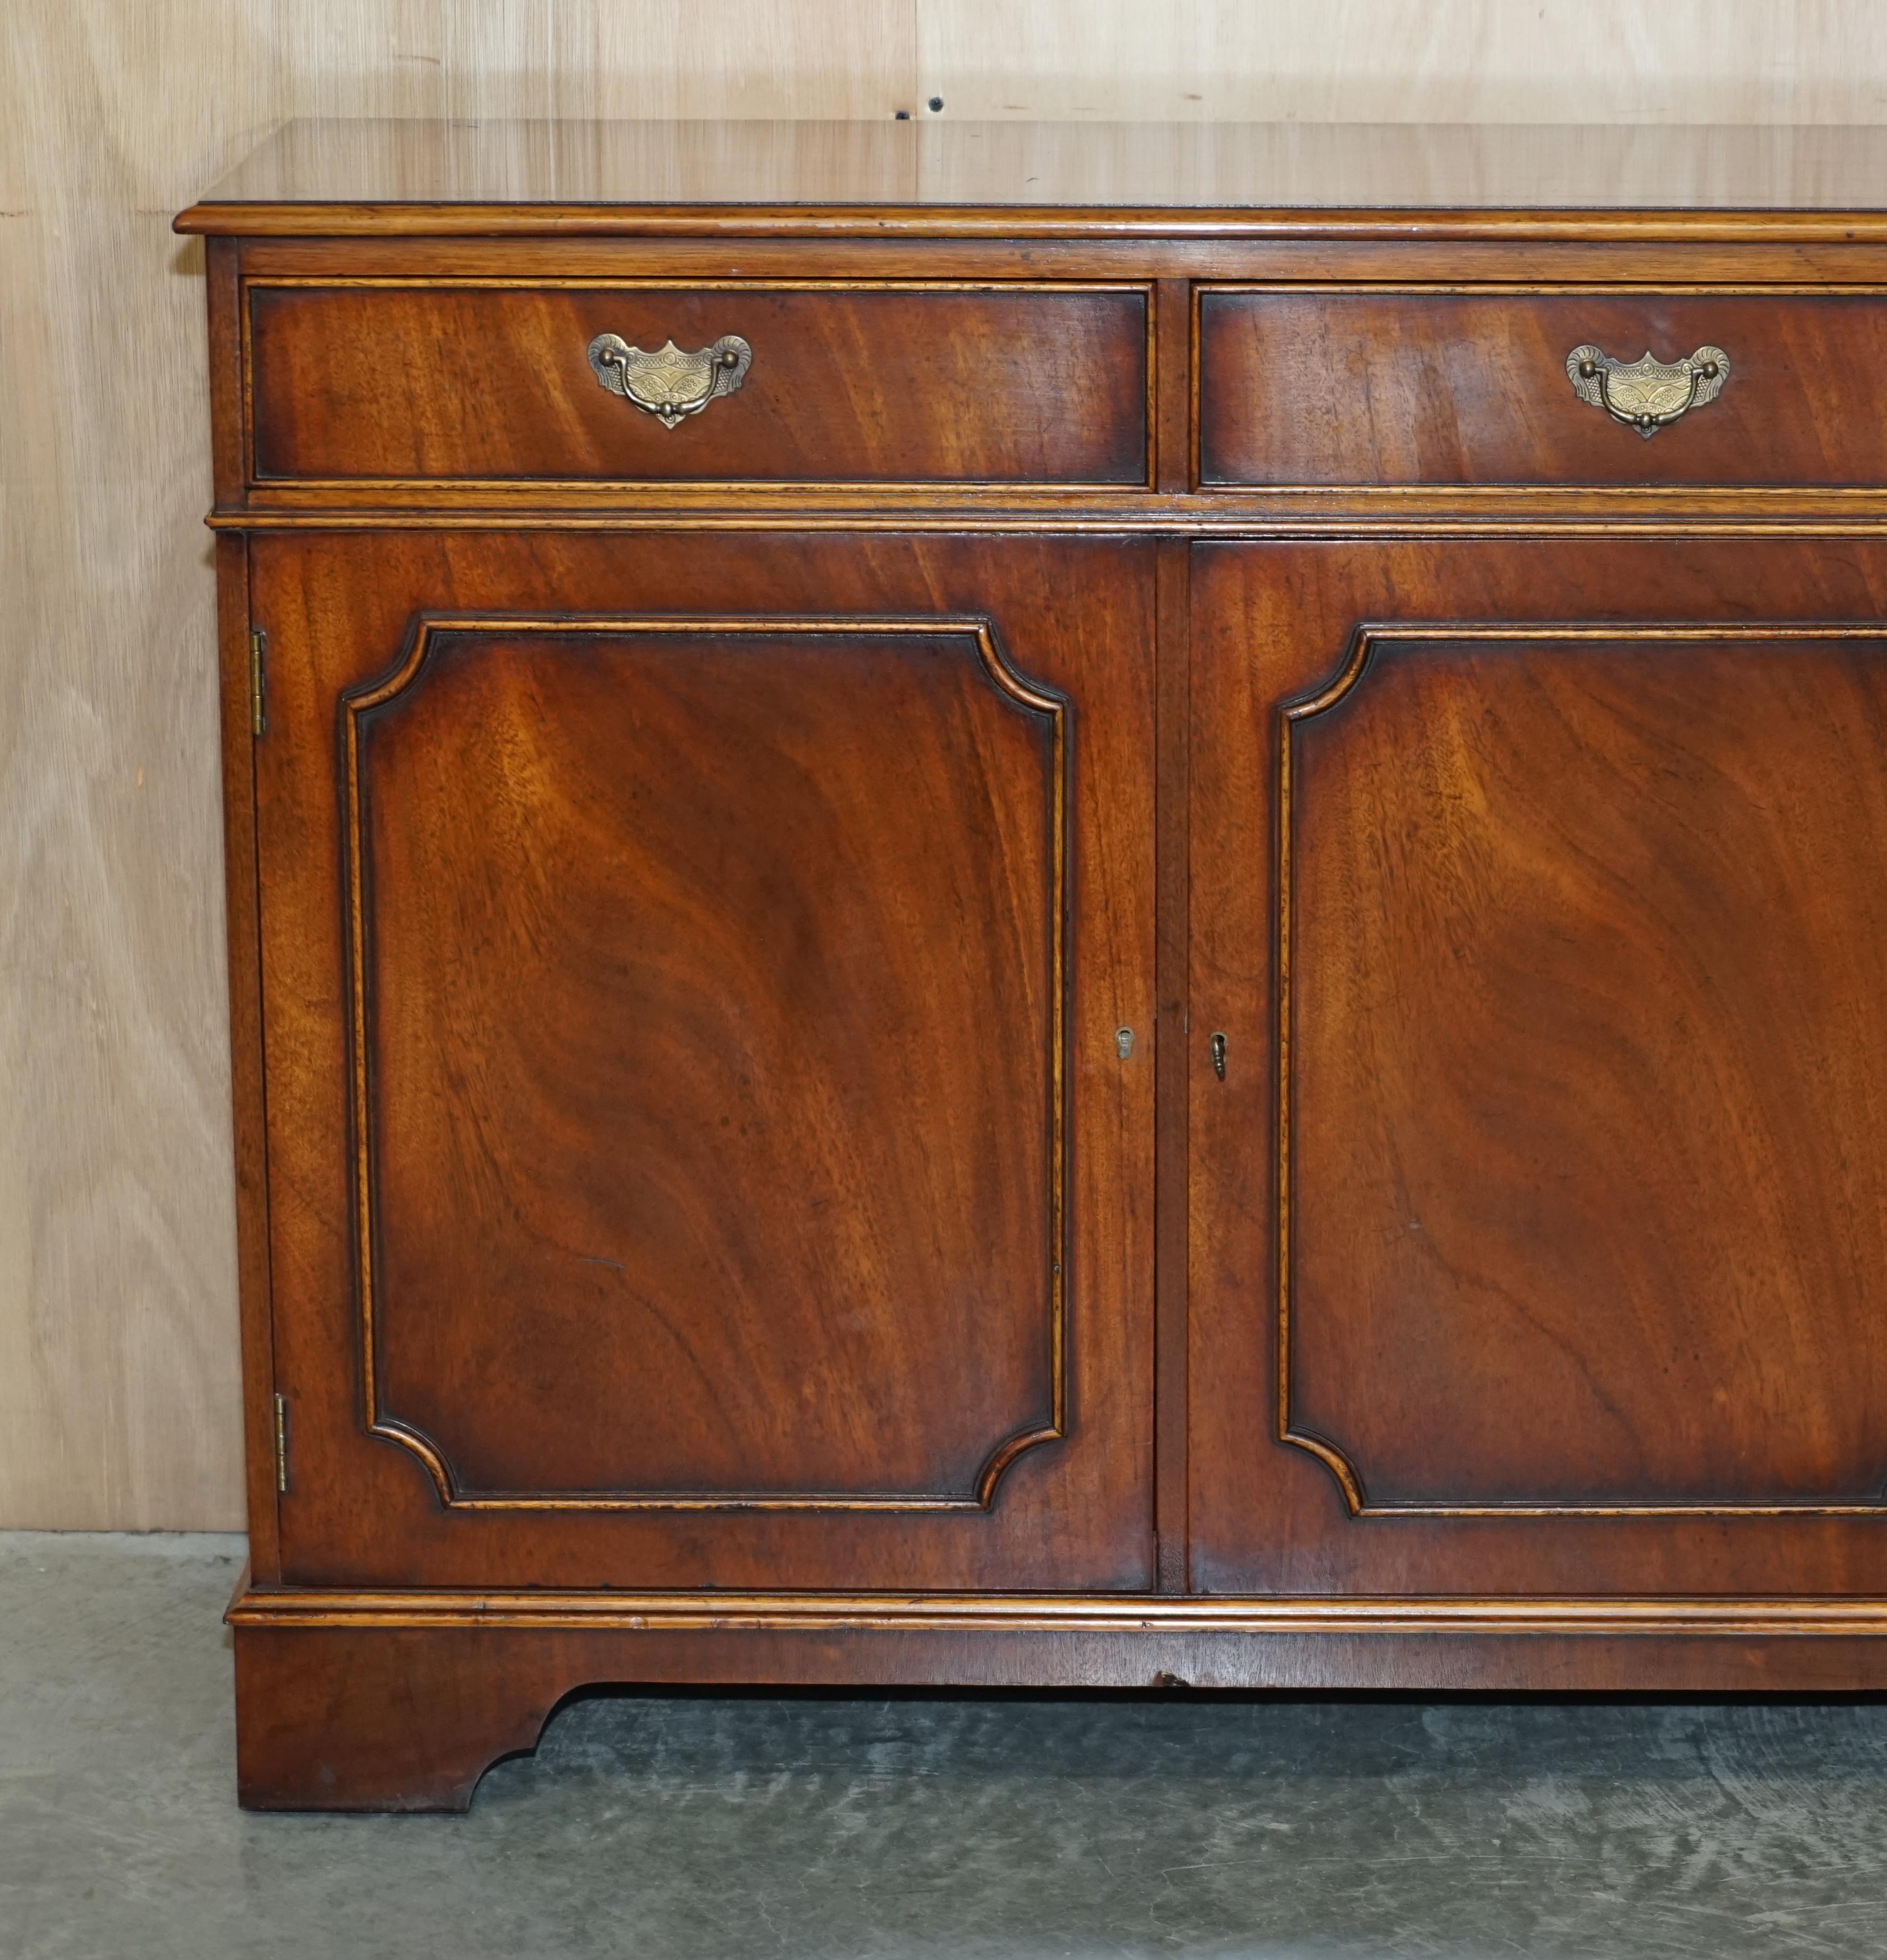 Victorian Stunning Vintage Flamed Hardwood Sideboard Bookcase with Three Large Drawers For Sale